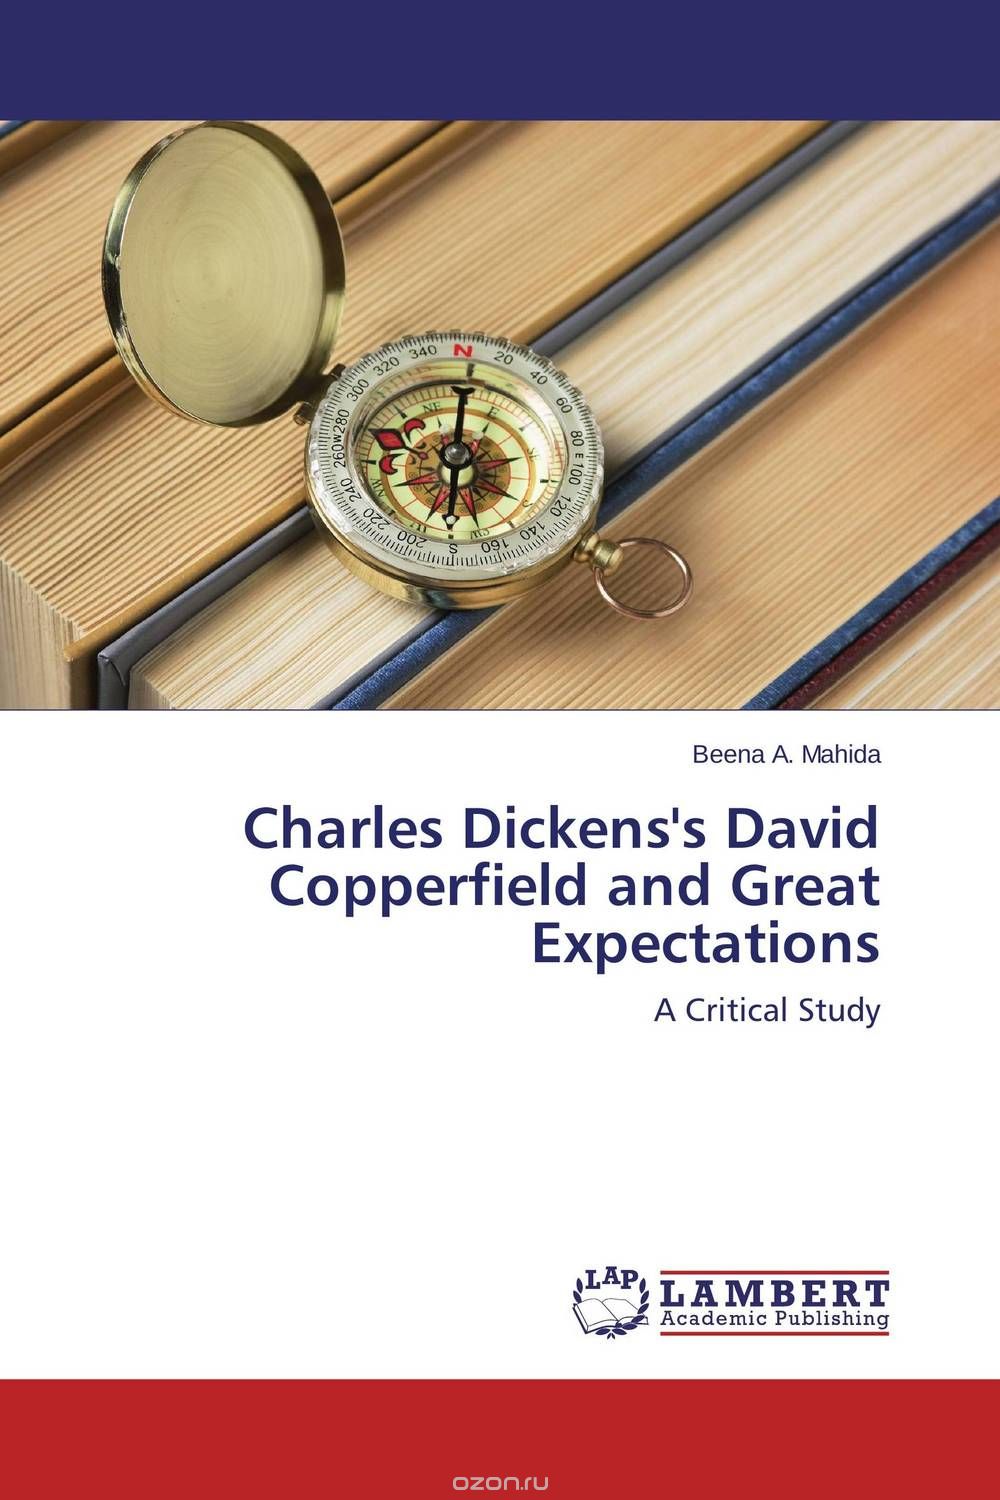 Скачать книгу "Charles Dickens's David Copperfield and Great Expectations"